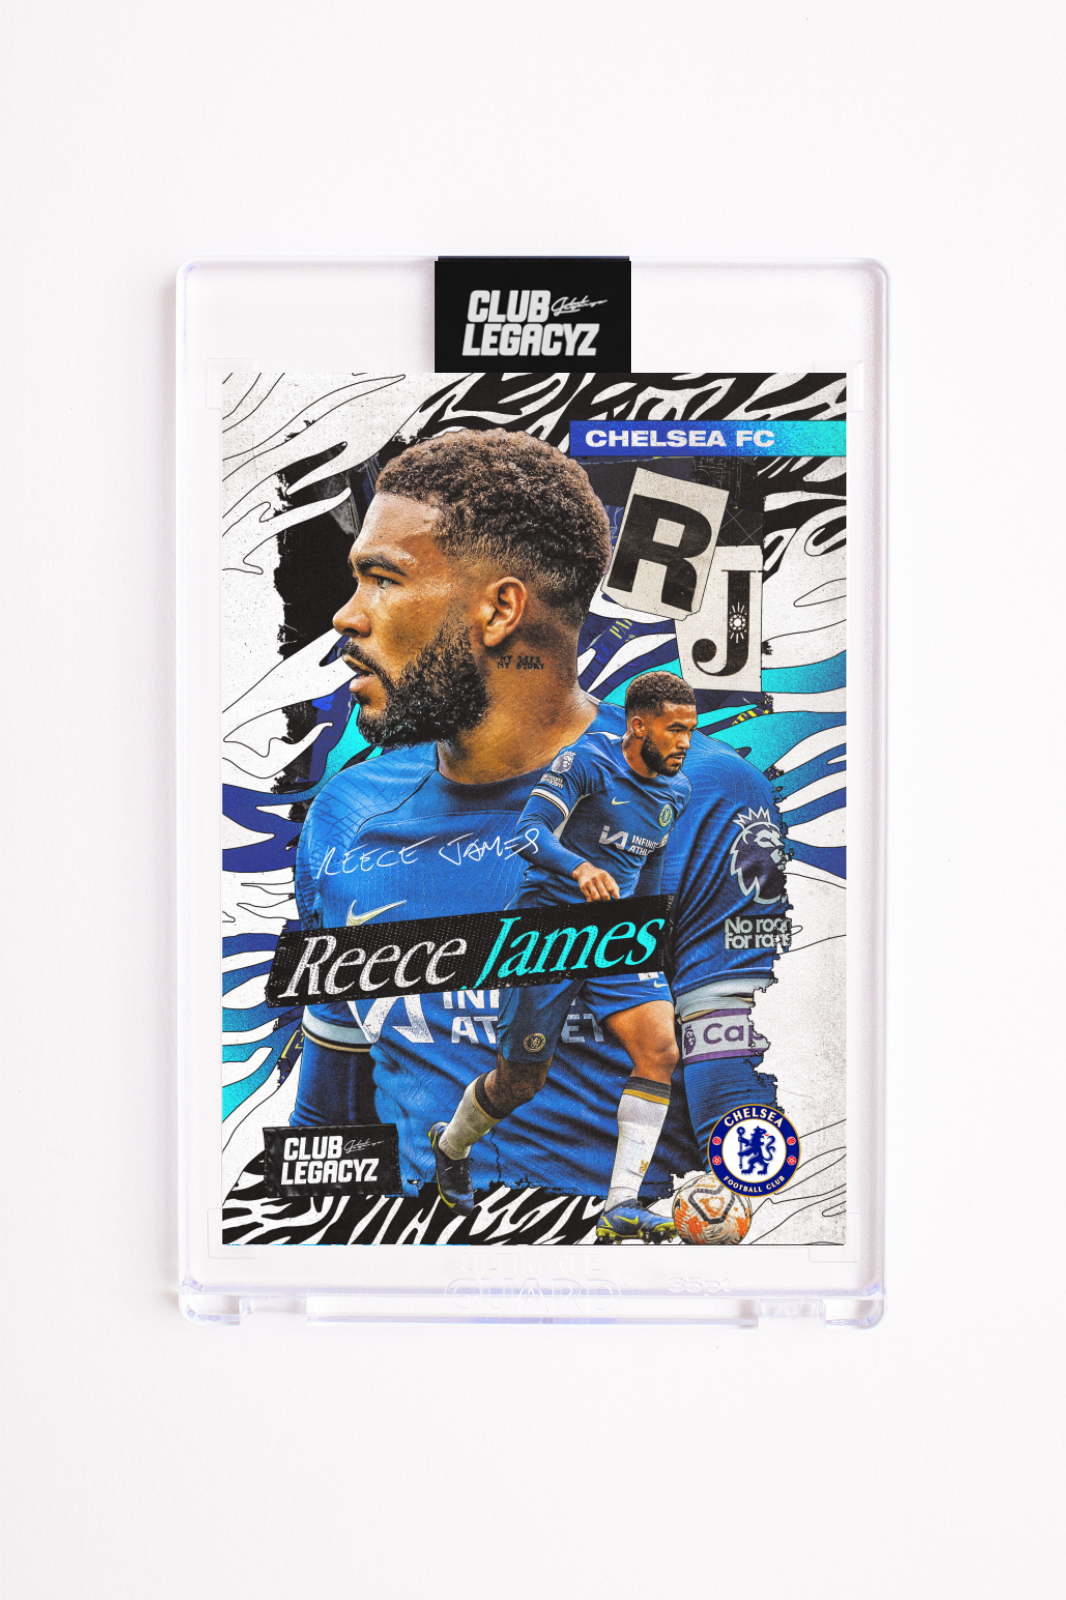 Chelsea FC - Reece James Icon limited to 999